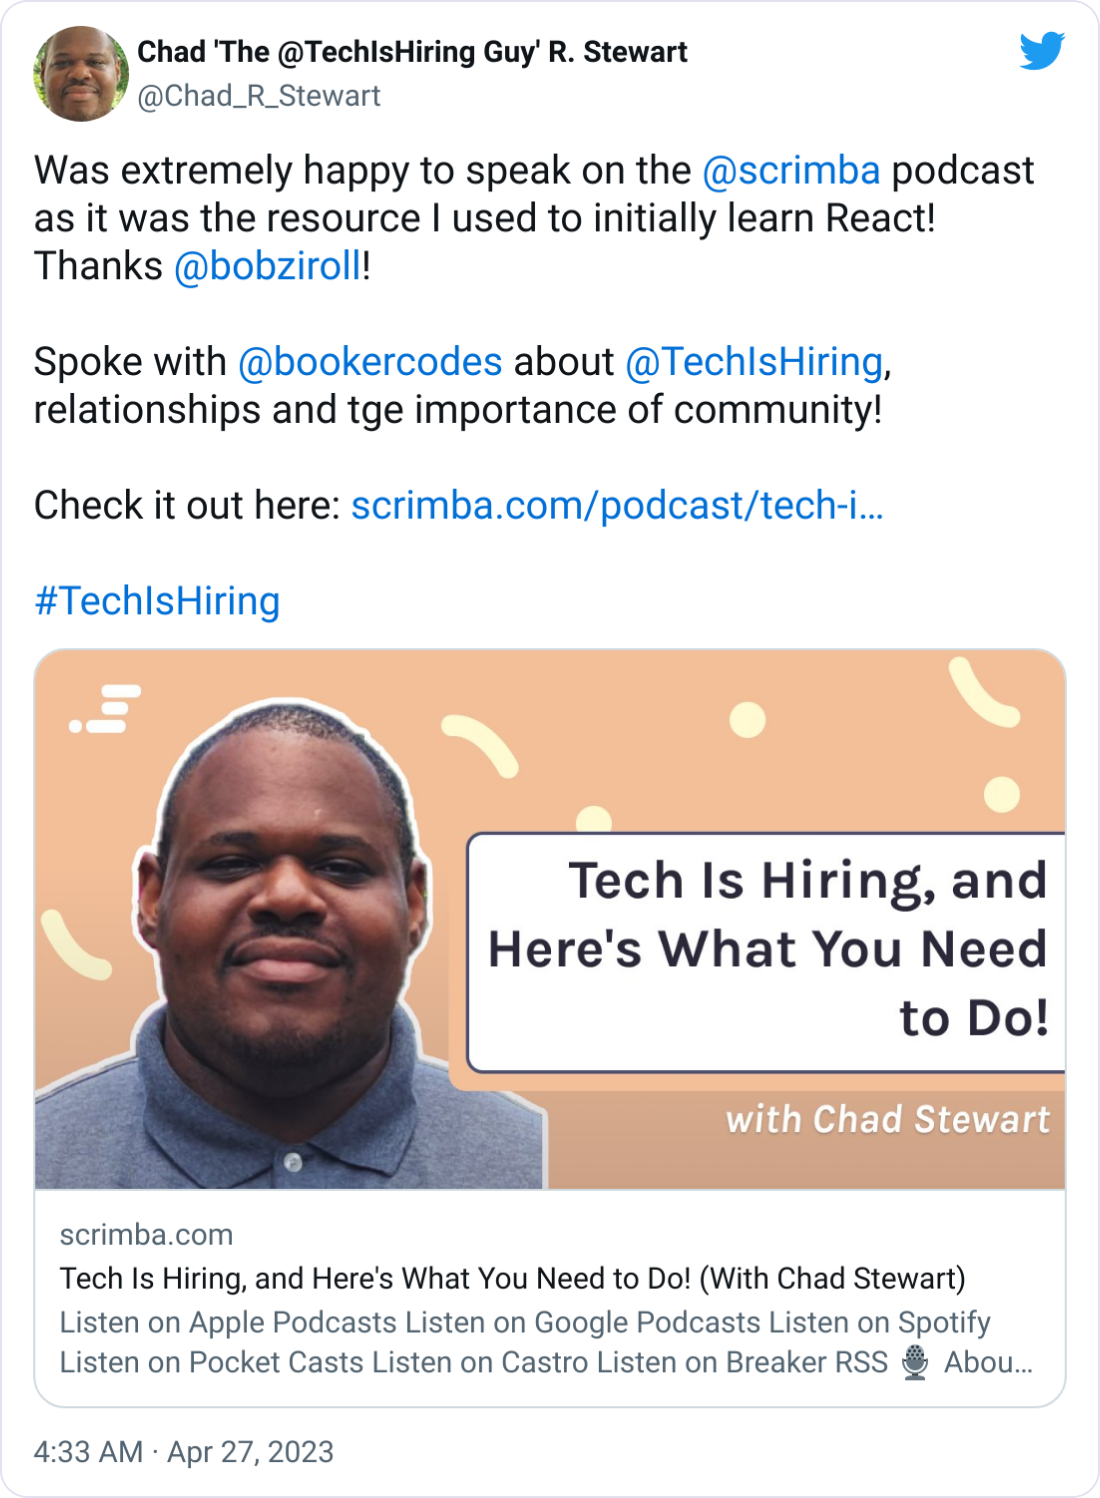 Chad 'The @TechIsHiring Guy' R. Stewart @Chad_R_Stewart Was extremely happy to speak on the  @scrimba  podcast as it was the resource I used to initially learn React! Thanks  @bobziroll !  Spoke with  @bookercodes  about  @TechIsHiring , relationships and tge importance of community!  Check it out here: https://scrimba.com/podcast/tech-is-hiring-and-heres-what-you-need-to-do-with-chad-stewart/  #TechIsHiring